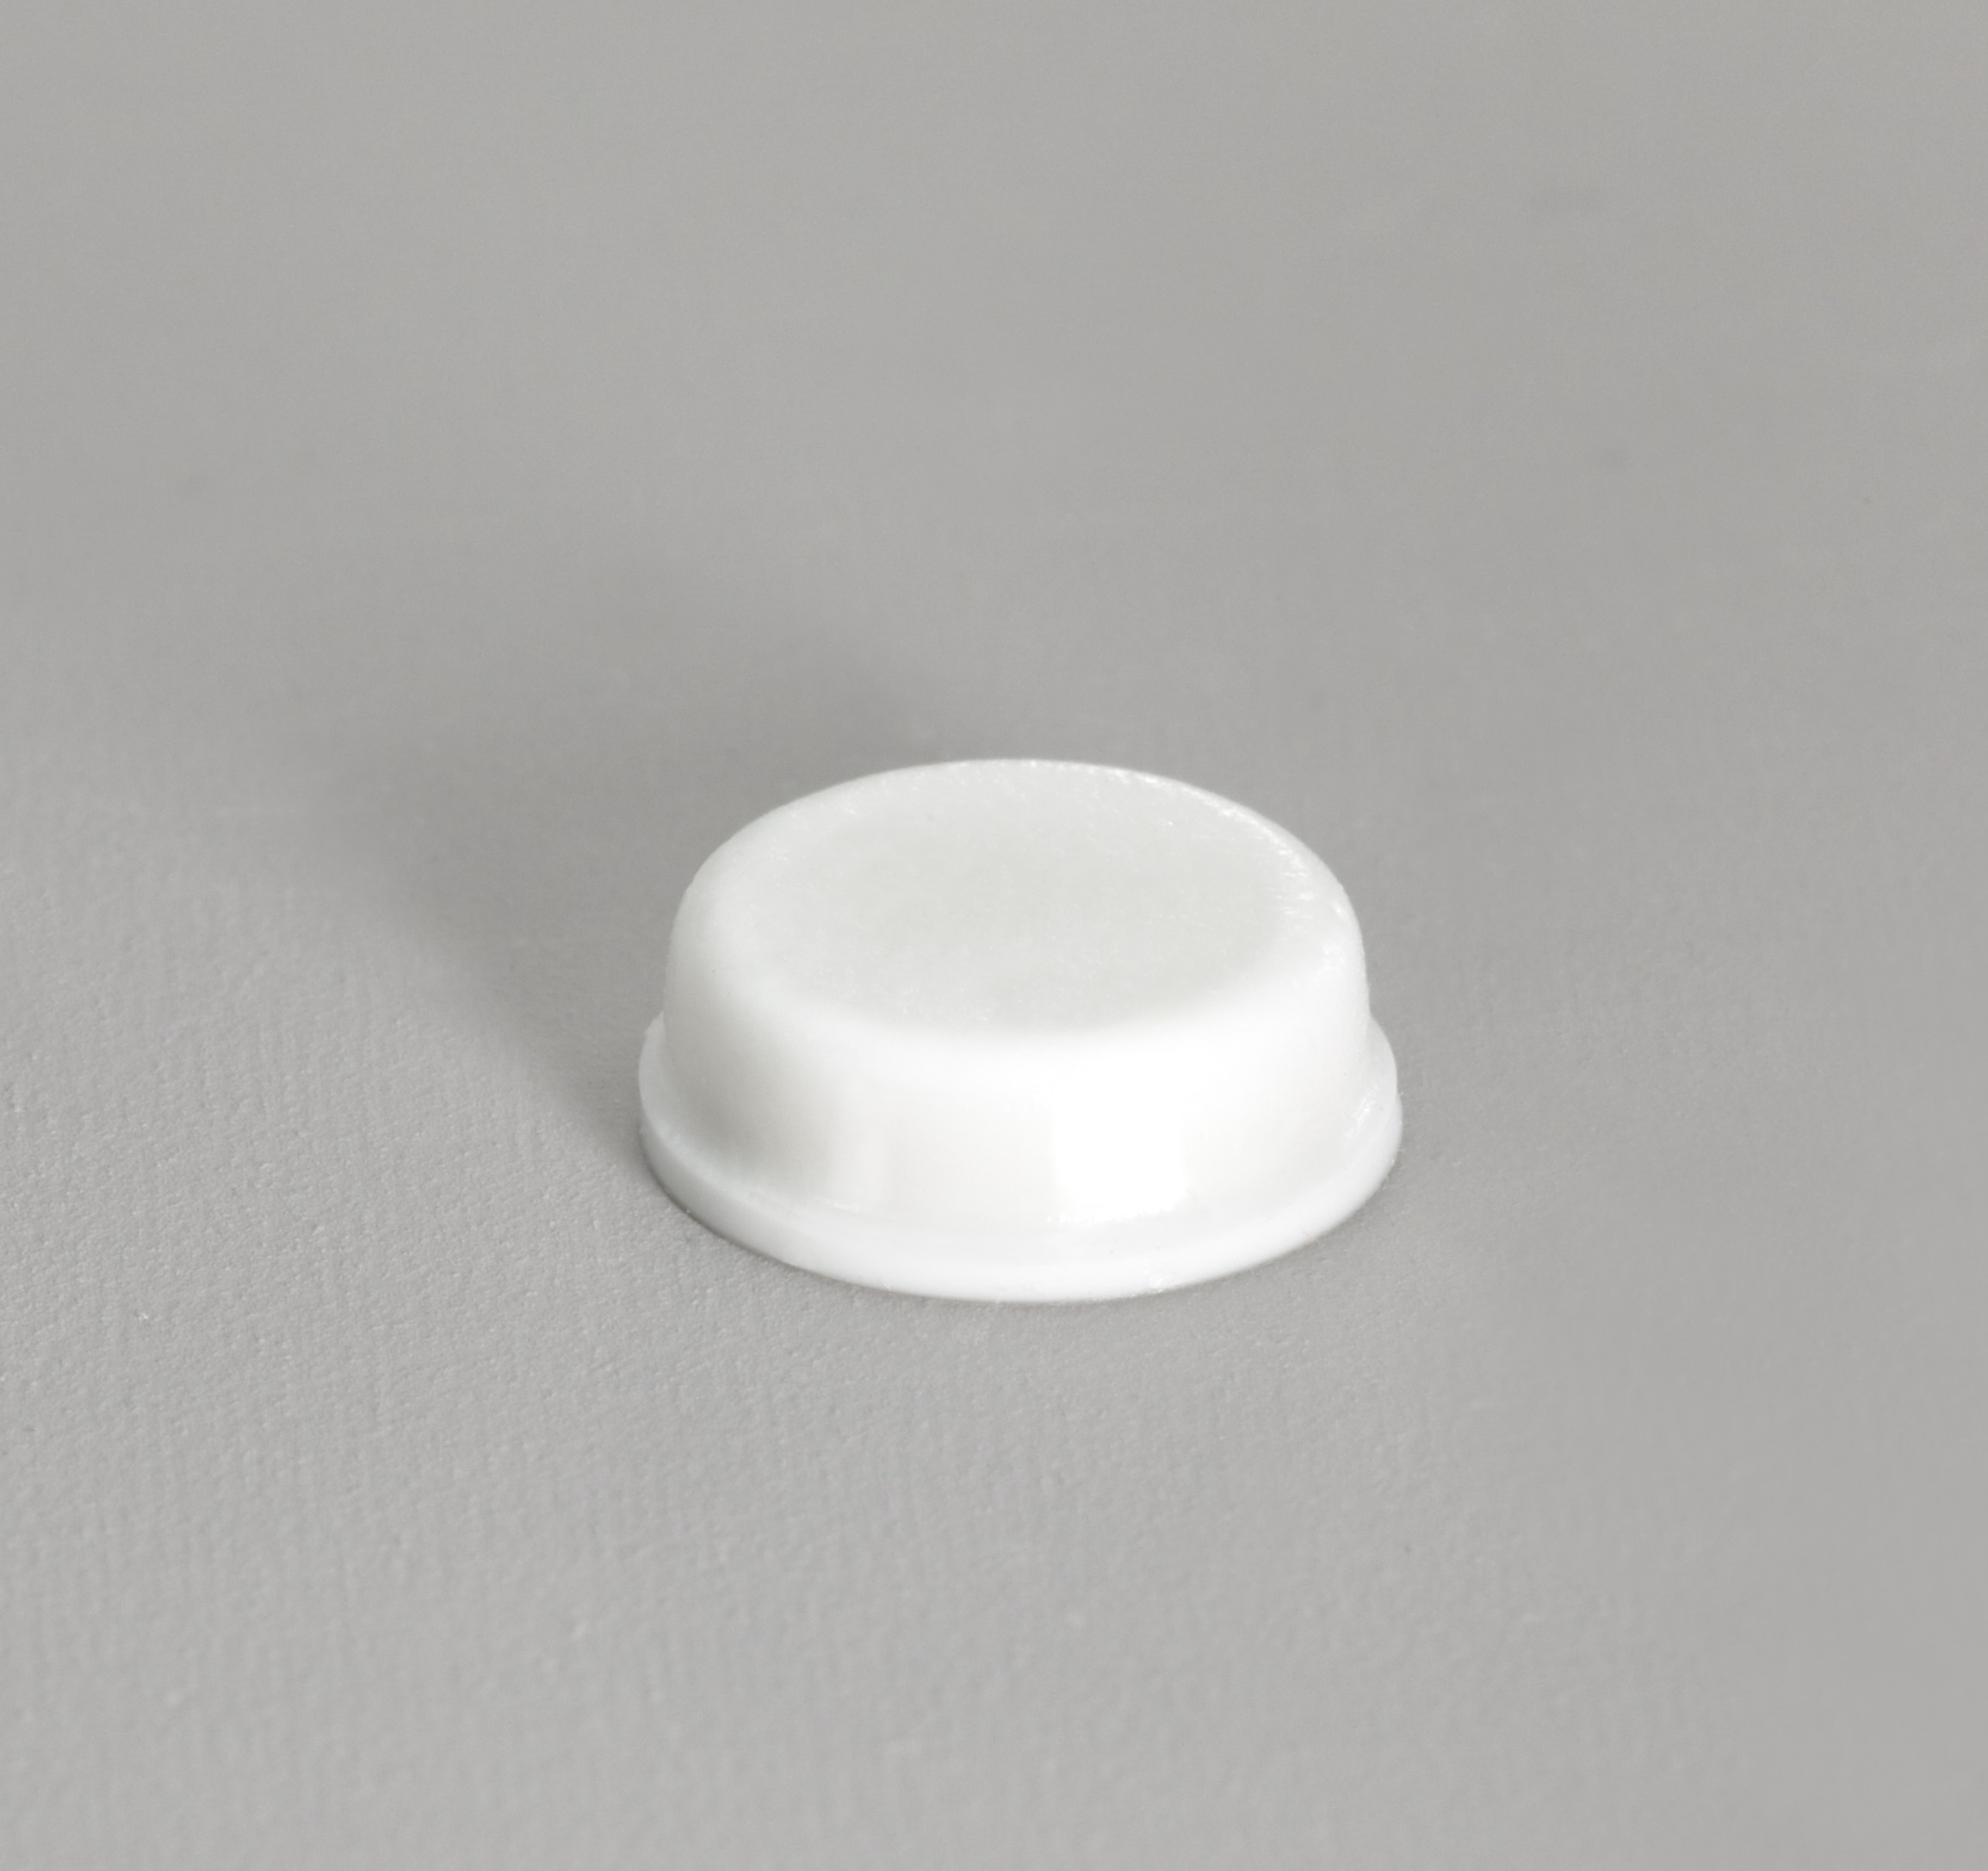 BS-34 WHITE product image